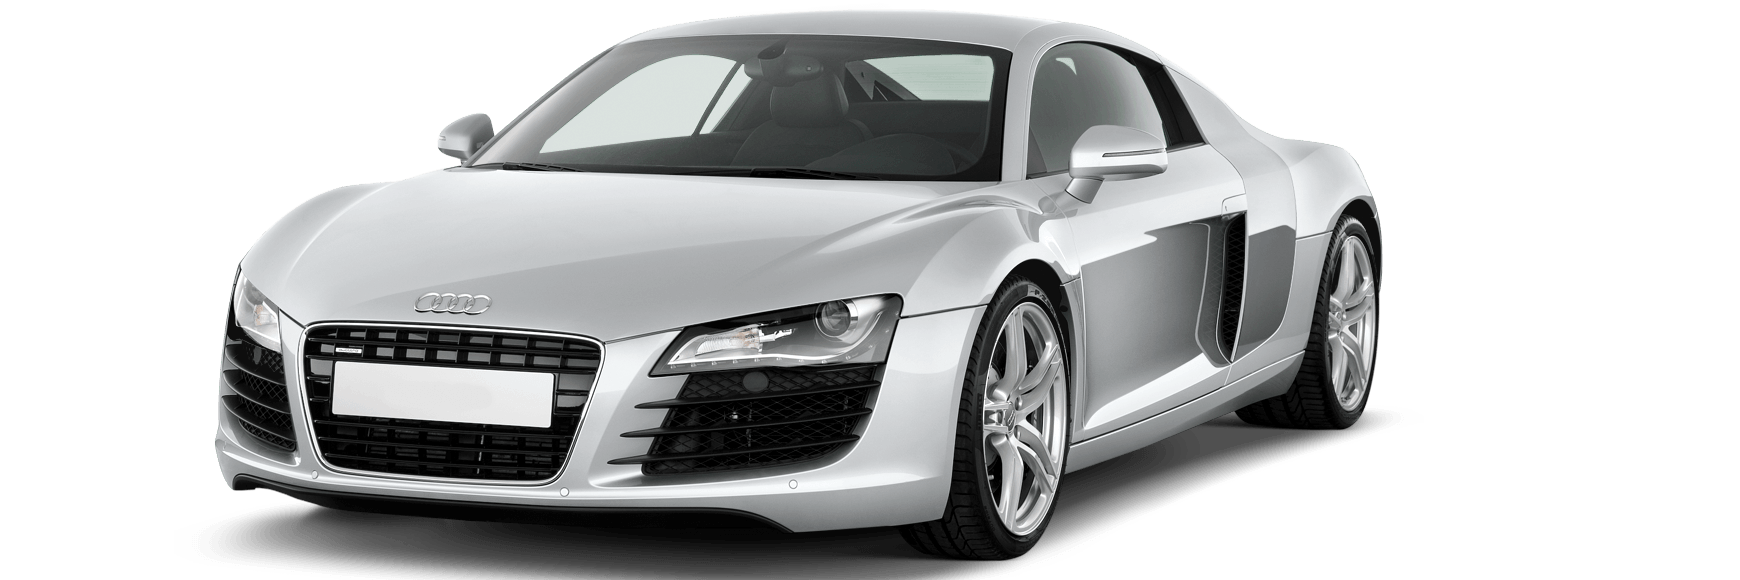 Audi R8 PNG Background